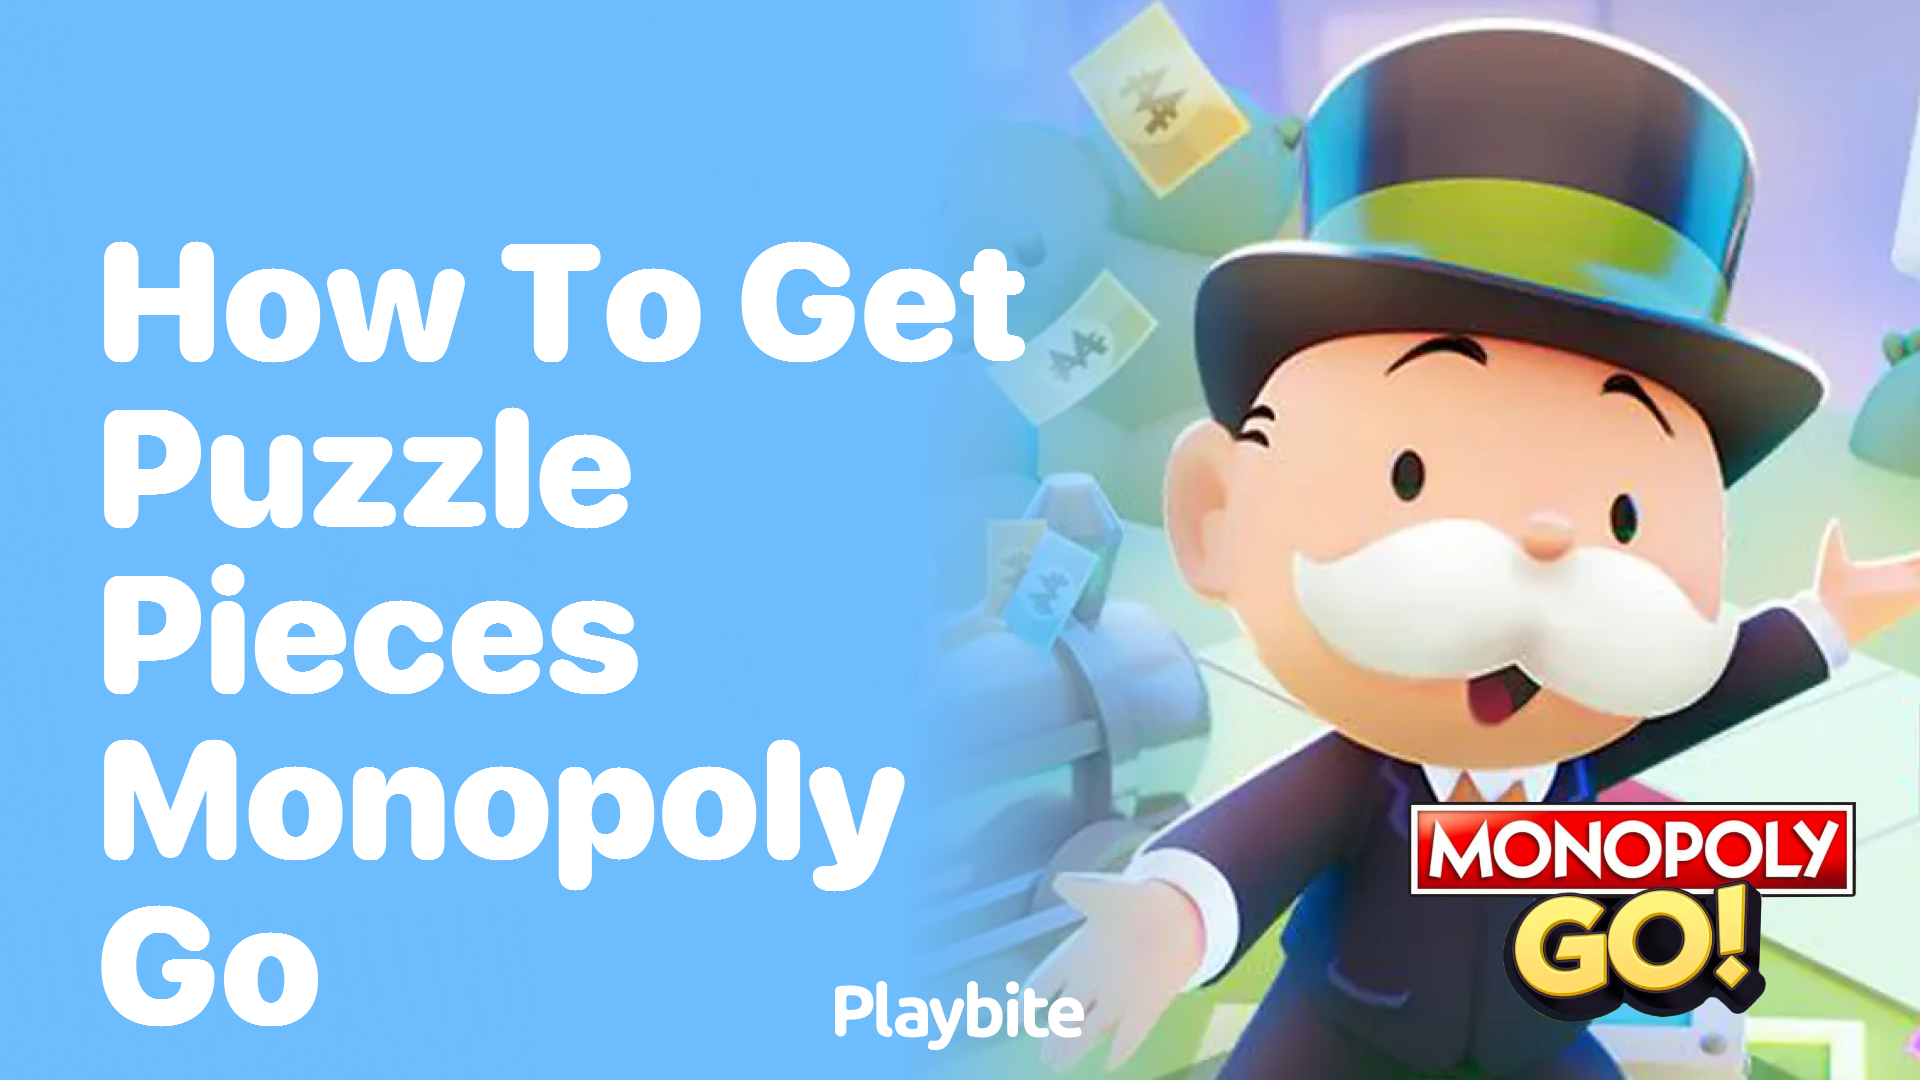 How to Get Puzzle Pieces in Monopoly Go